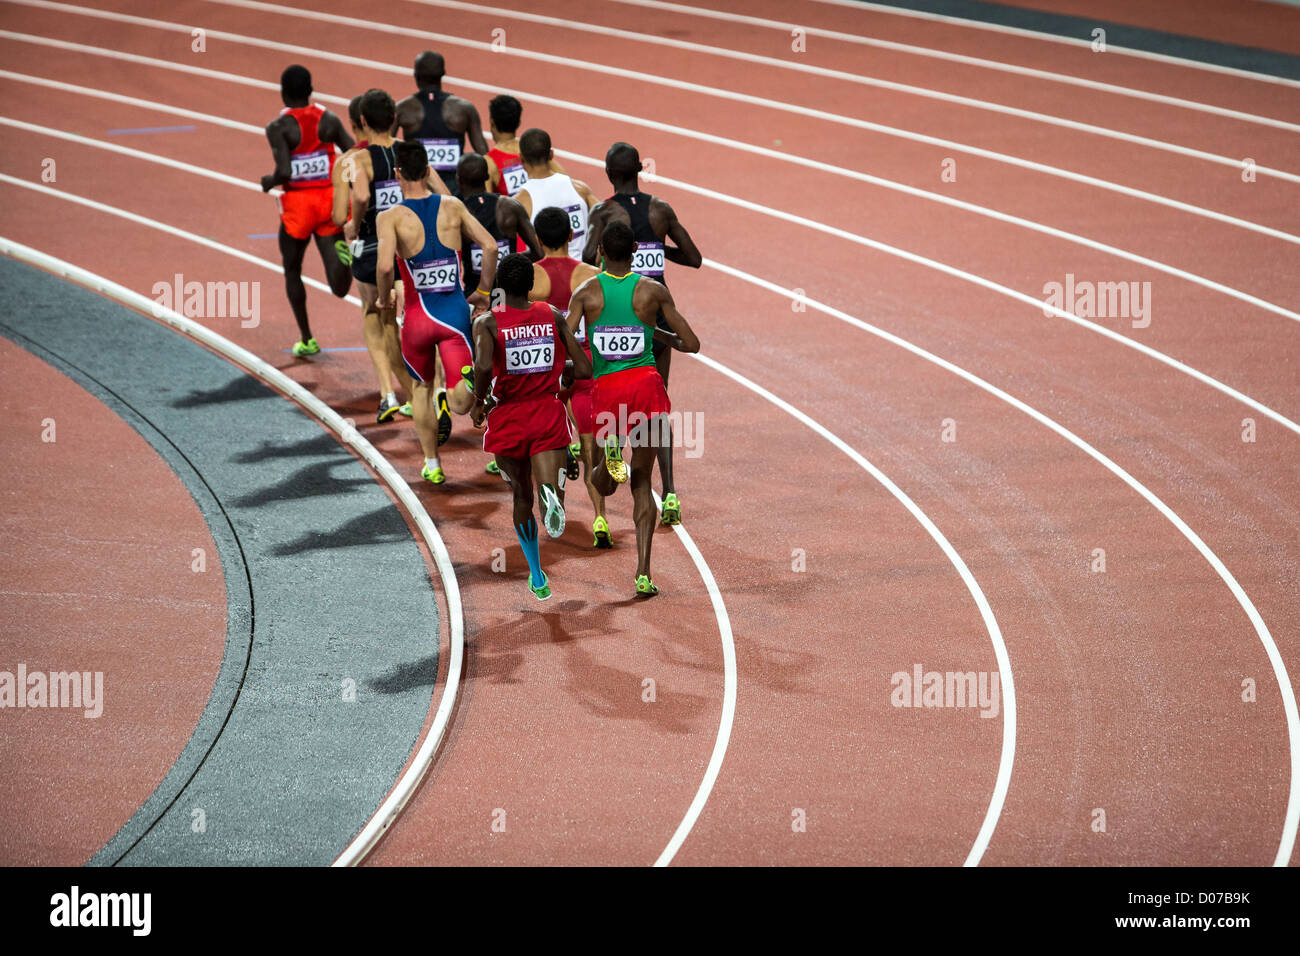 Men's 1500m final at the Olympic Summer Games, London 2012 Stock Photo